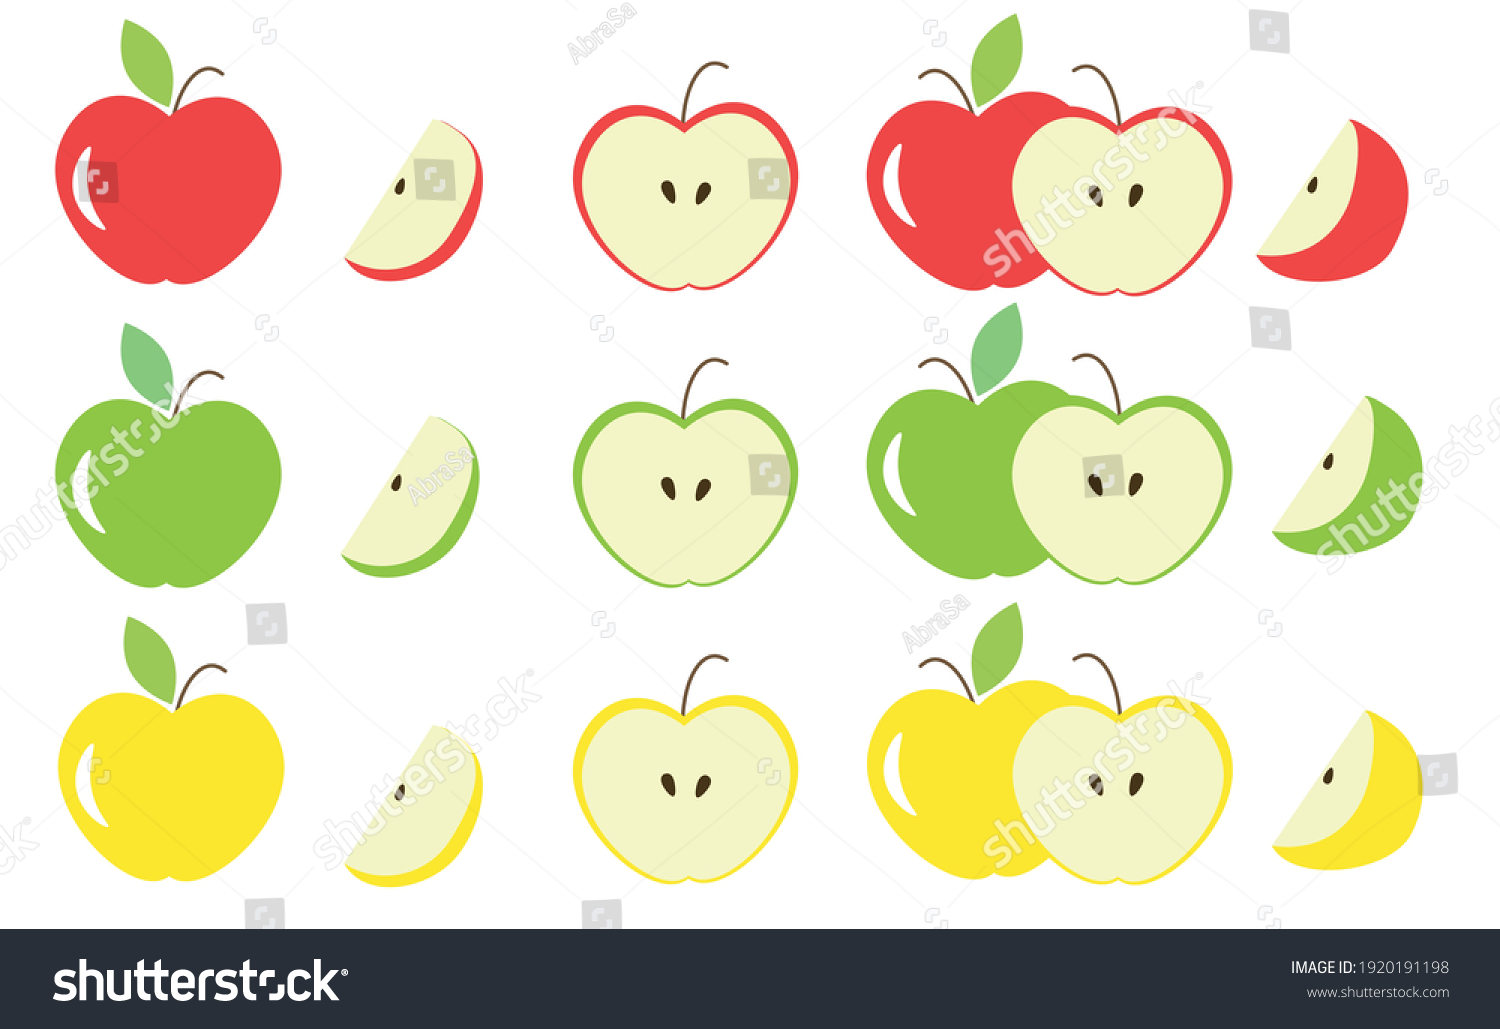 Different colors and parts of apples vector set. Fruit design elements. Whole apples, slices, leaves and apple seeds vector design elements isolated on white. Red, green and yellow apples set. #1920191198